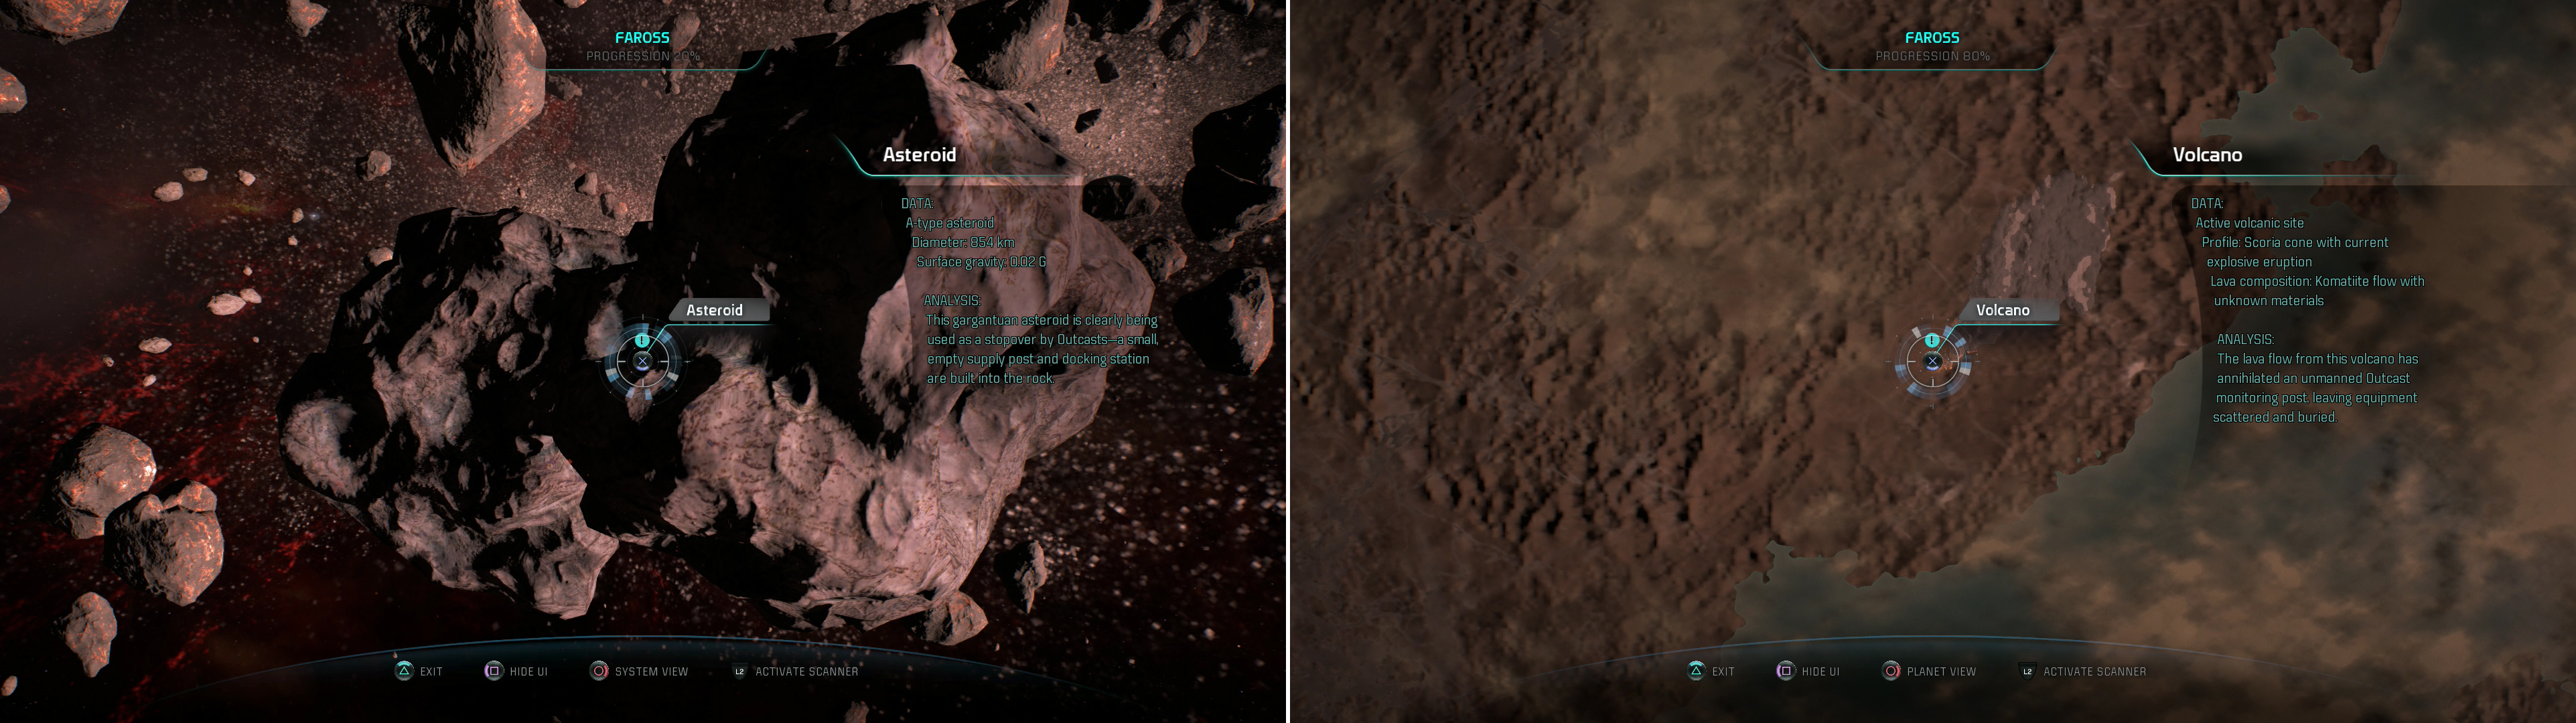 You'll gain some XP if you notice that some Outcasts have built a small supply post on an Asteroid (left). On Grill you'll find a Volcano, which is also worth XP (right).